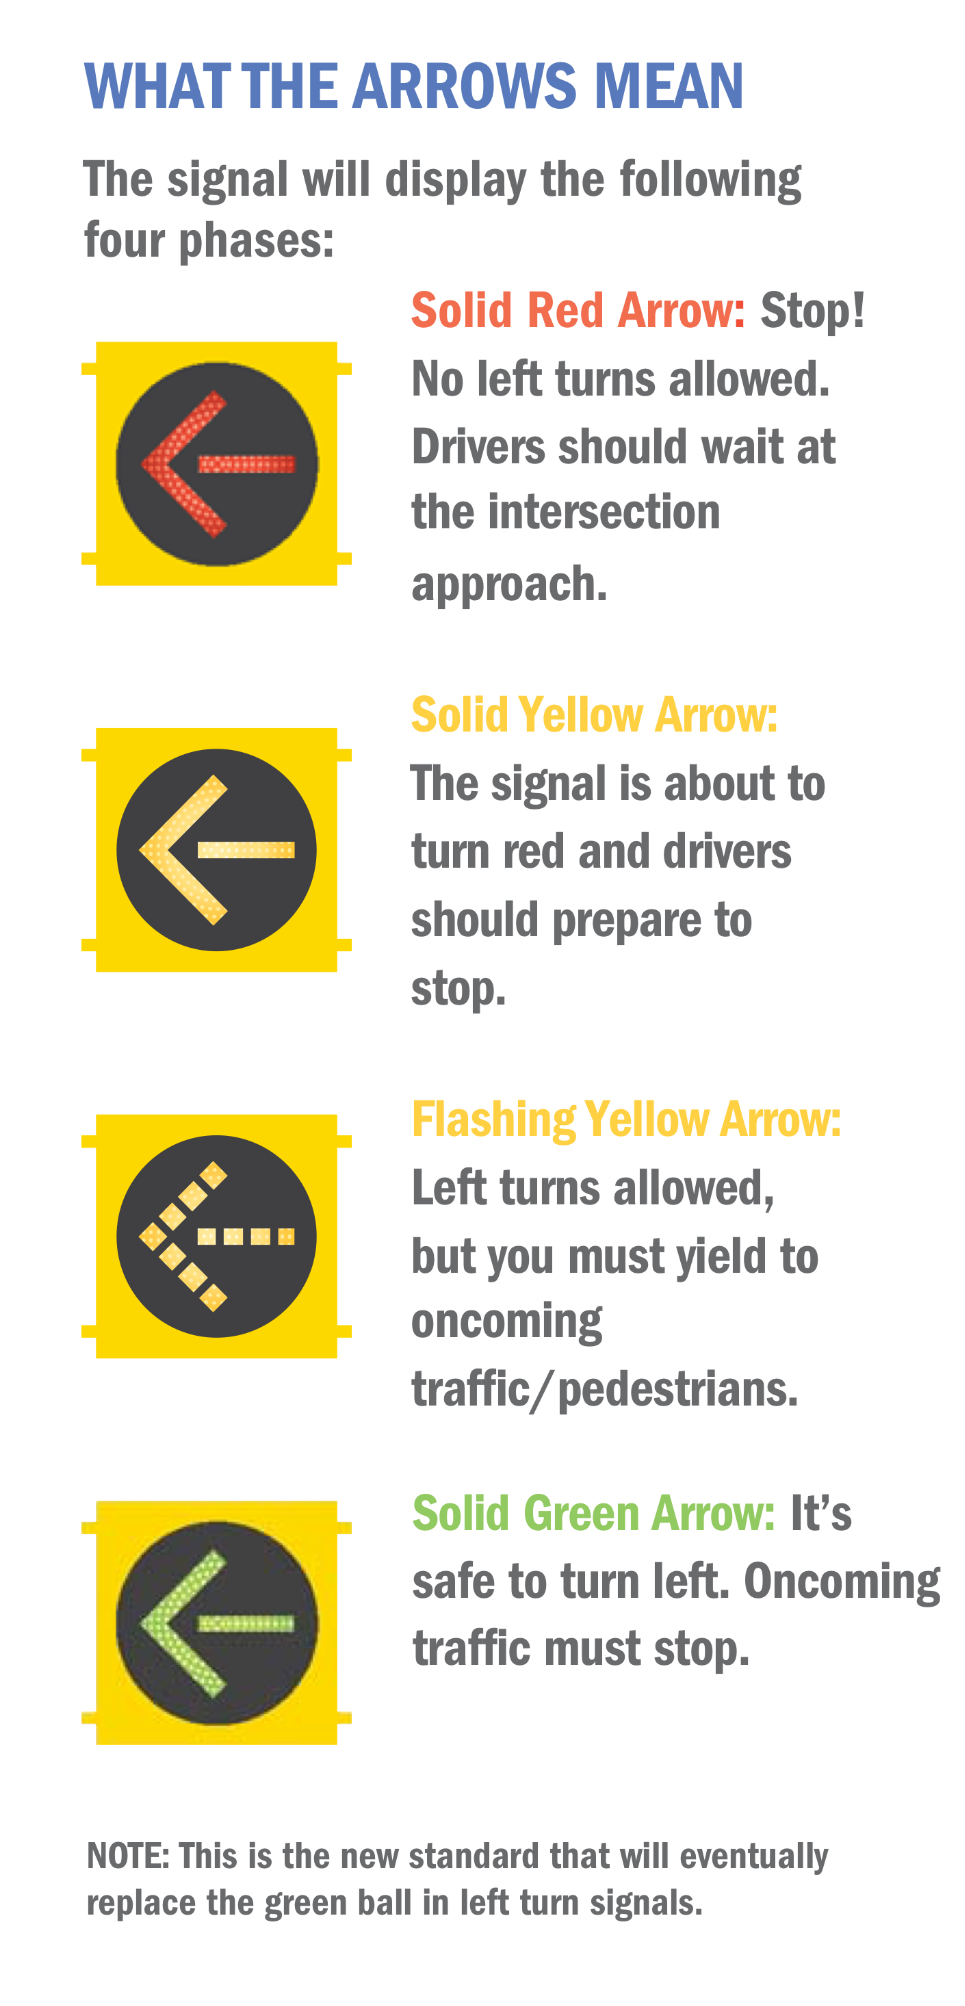 Have you seen new traffic signals the Texas Department of Transportation is placing around Mission? The lights feature a FLASHING YELLOW left turn signal and becoming the new standard